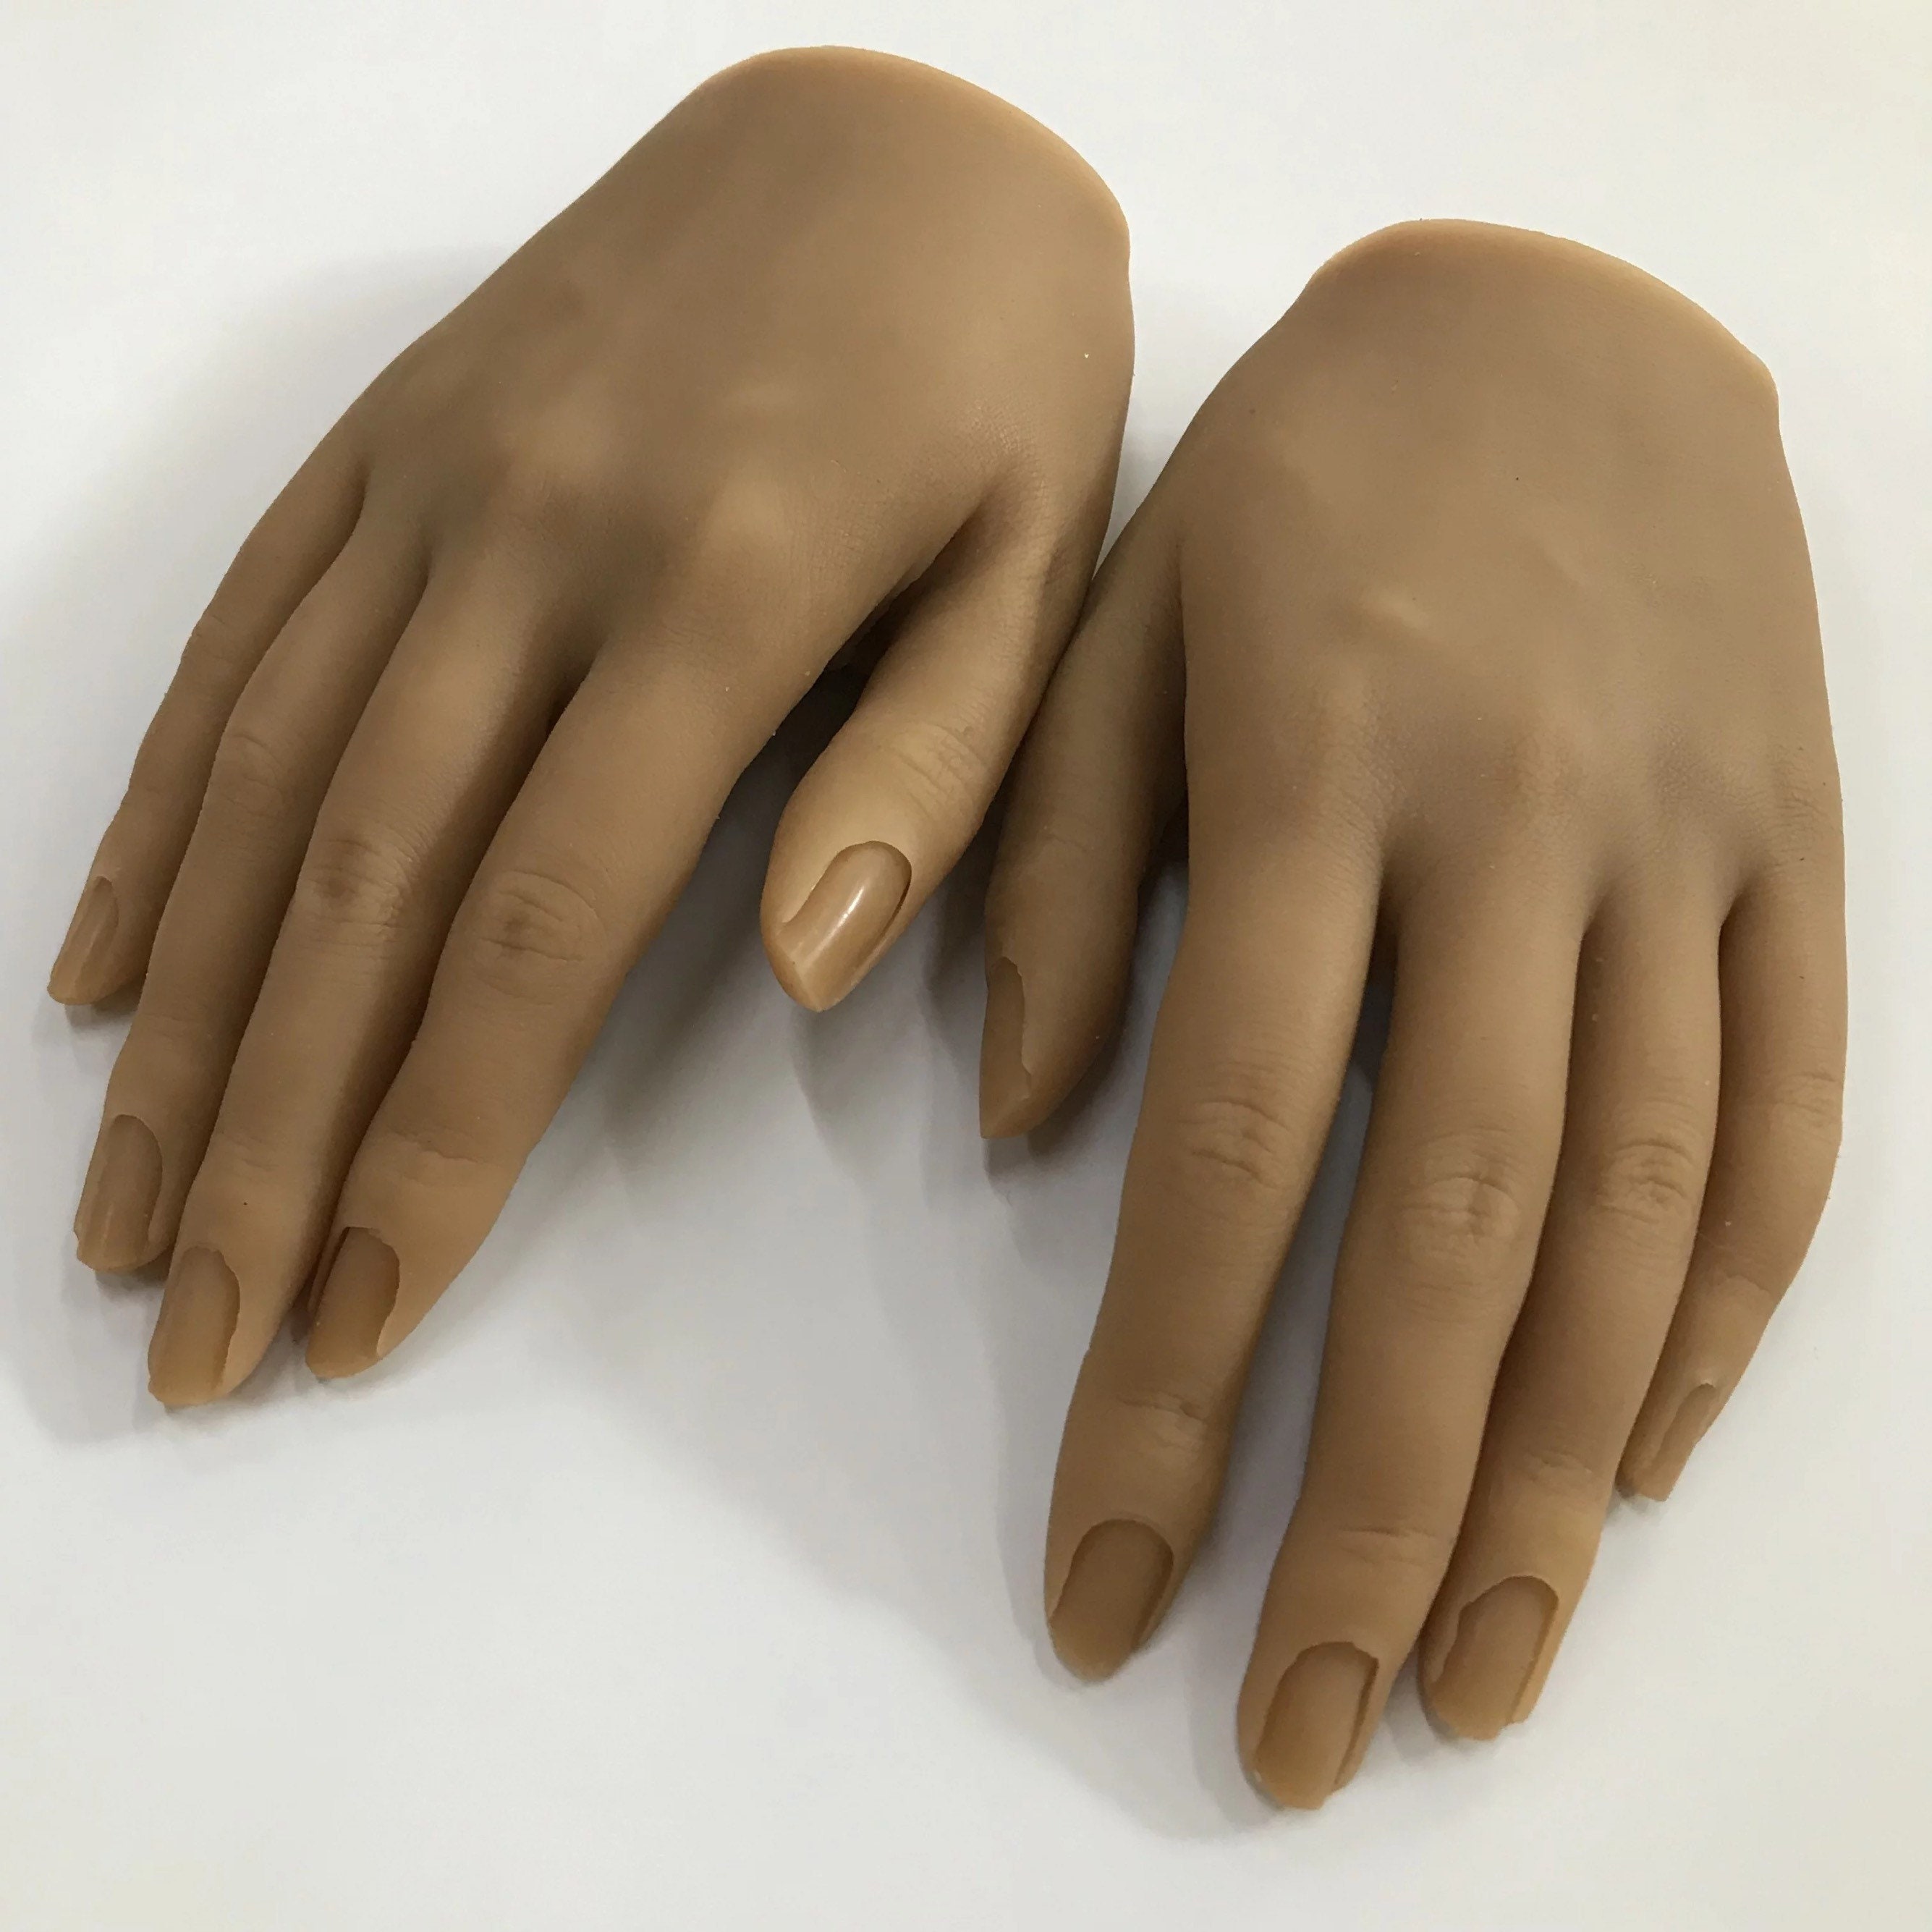 Full Nail Practice Silicone Hands For Nail Hands Display